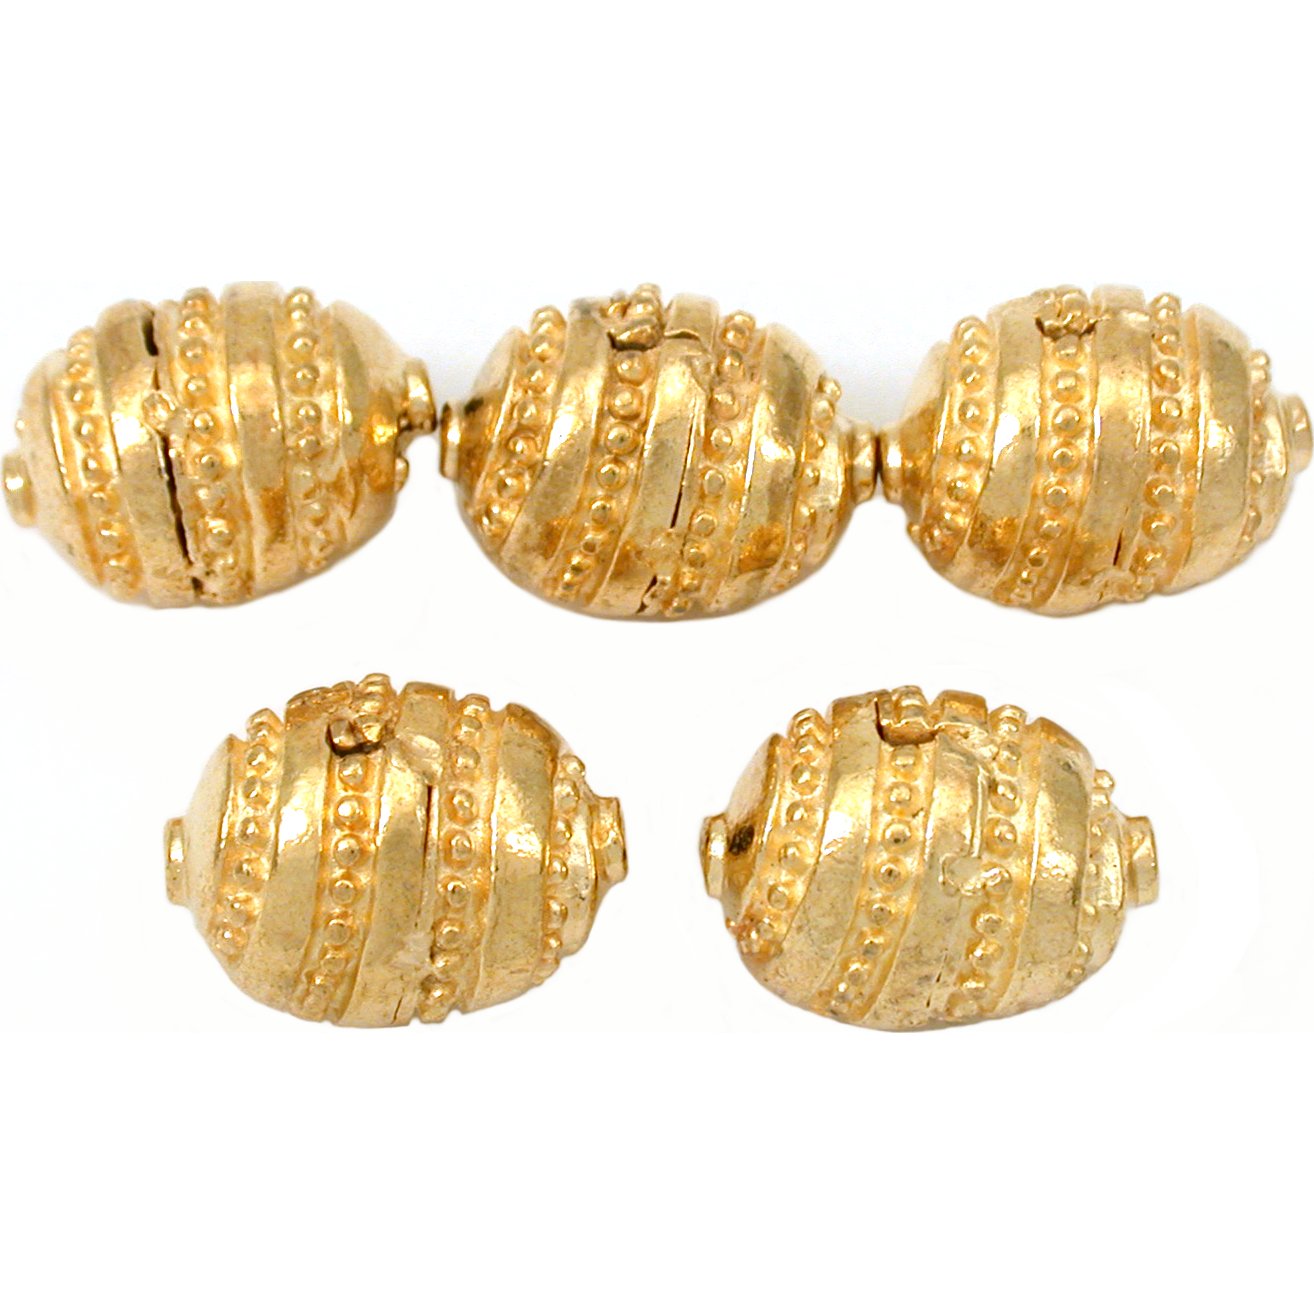 Findingking 18g Bali Oval Barrel Beads Gold Plated 11.5mm Approx 4